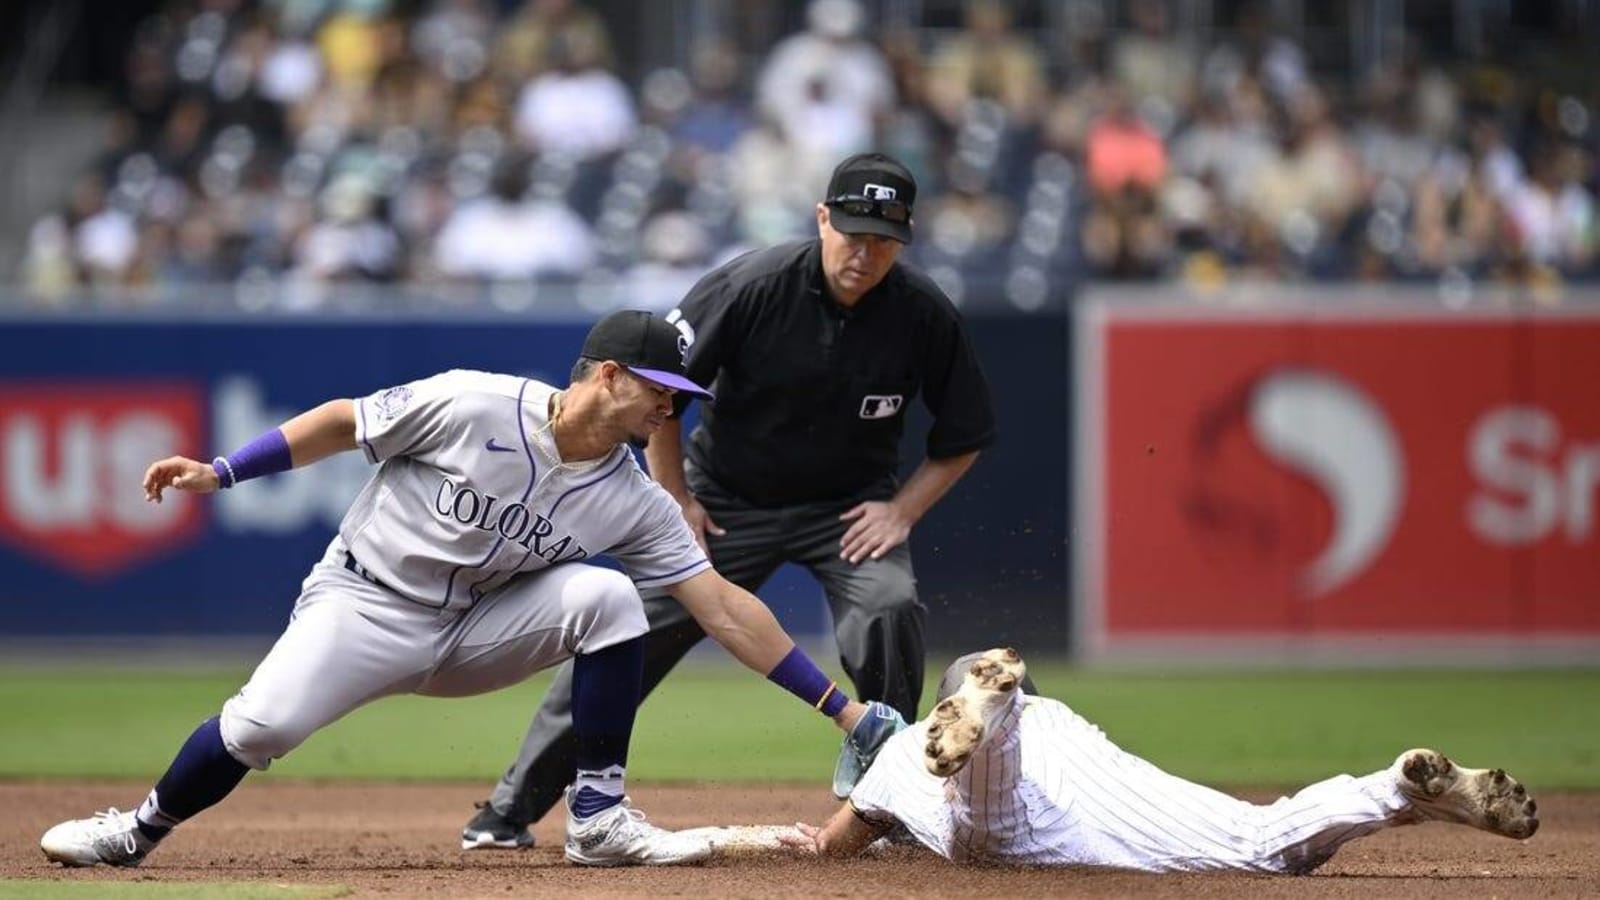 Padres rally to claim seventh straight win, 3-2 over Rockies